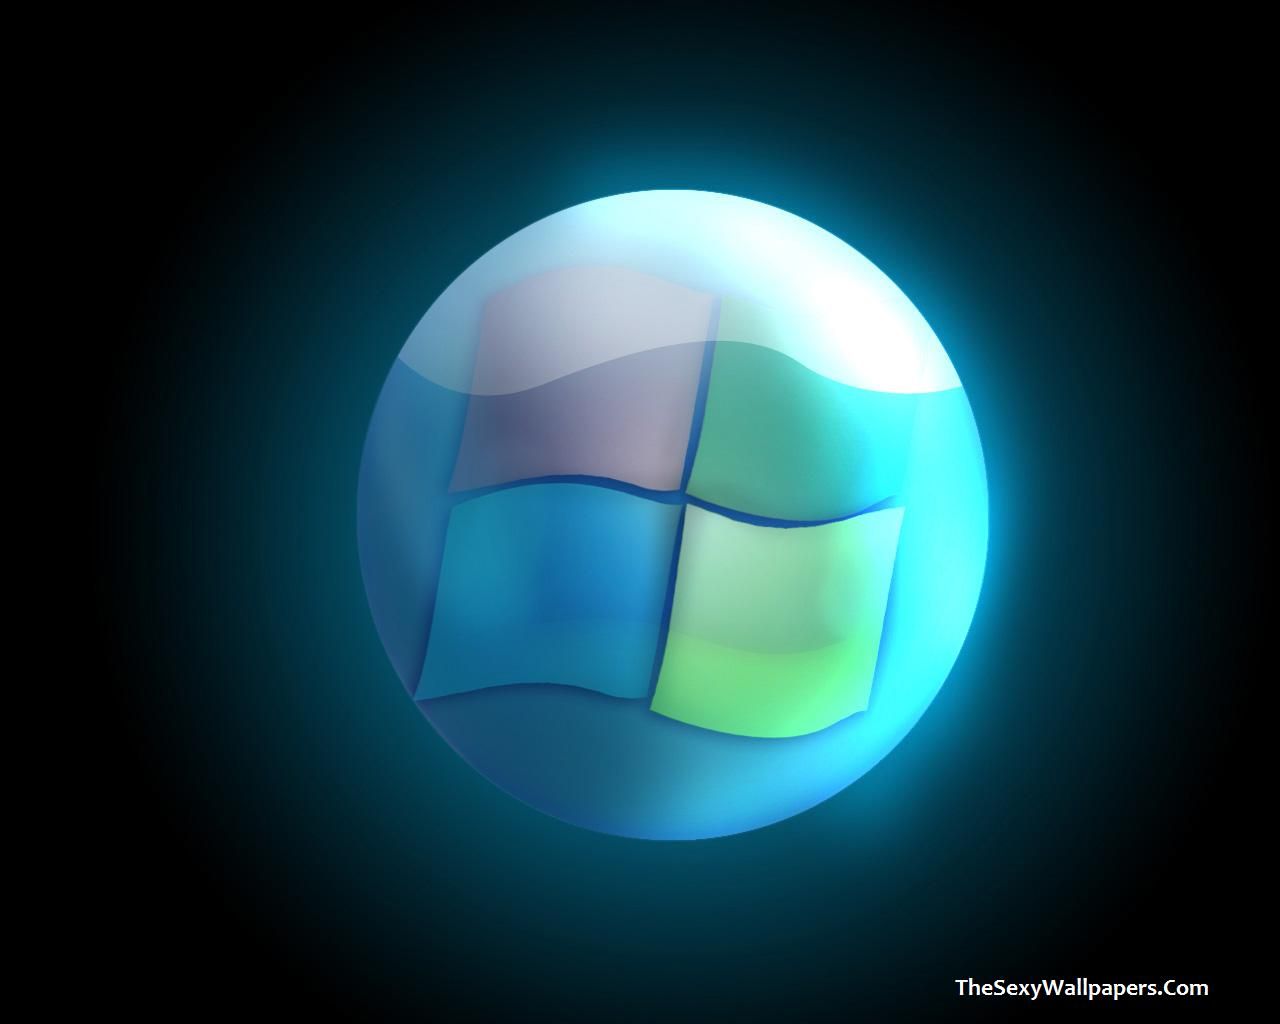 Microsoft Windows Wallpaper Free Download | Wallpapers Records